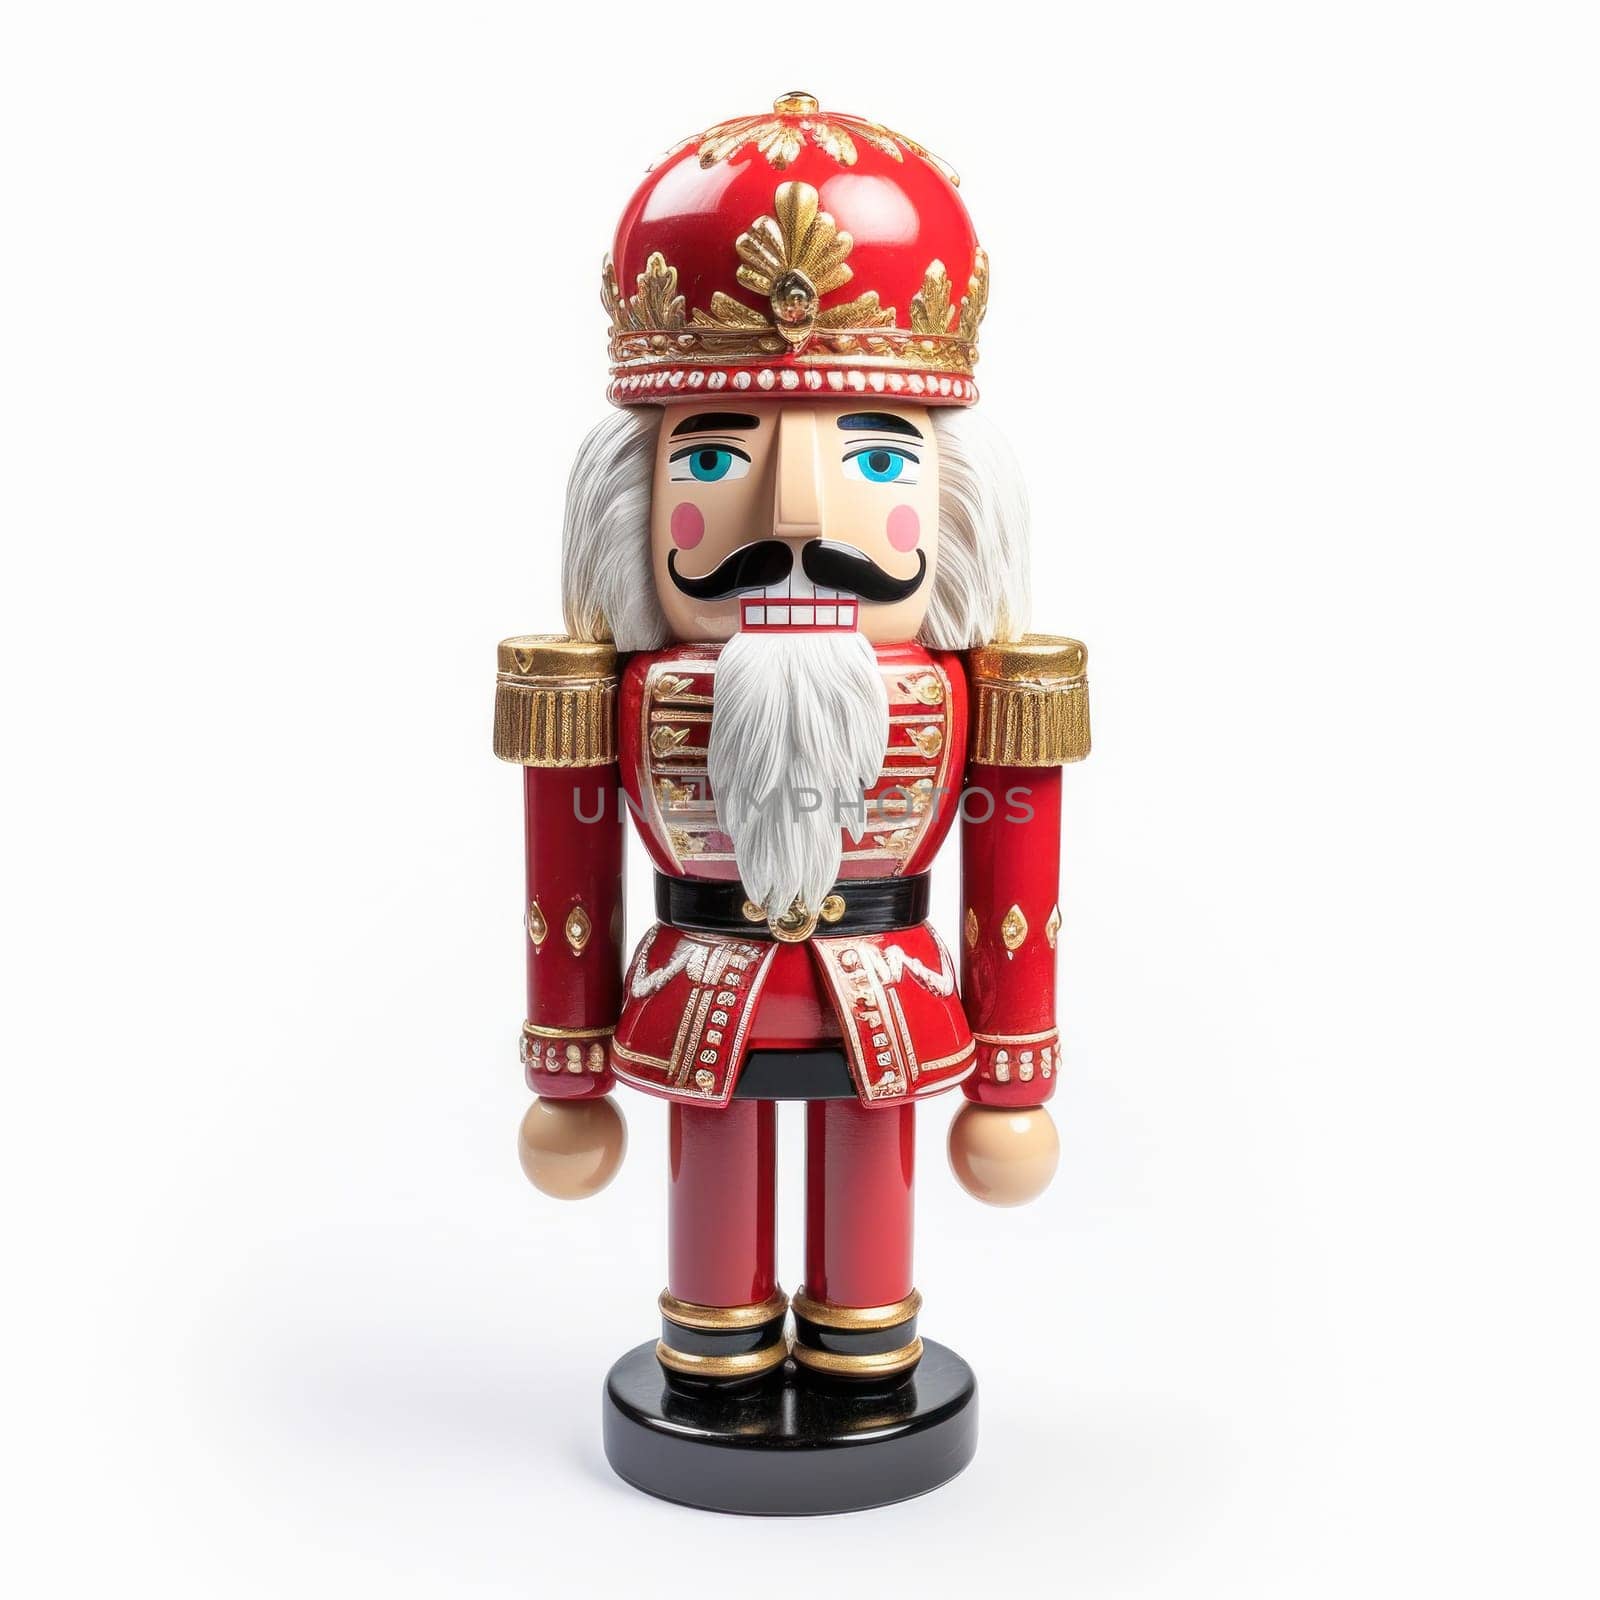 Decorative figurine of the Nutcracker on a white background by Yurich32